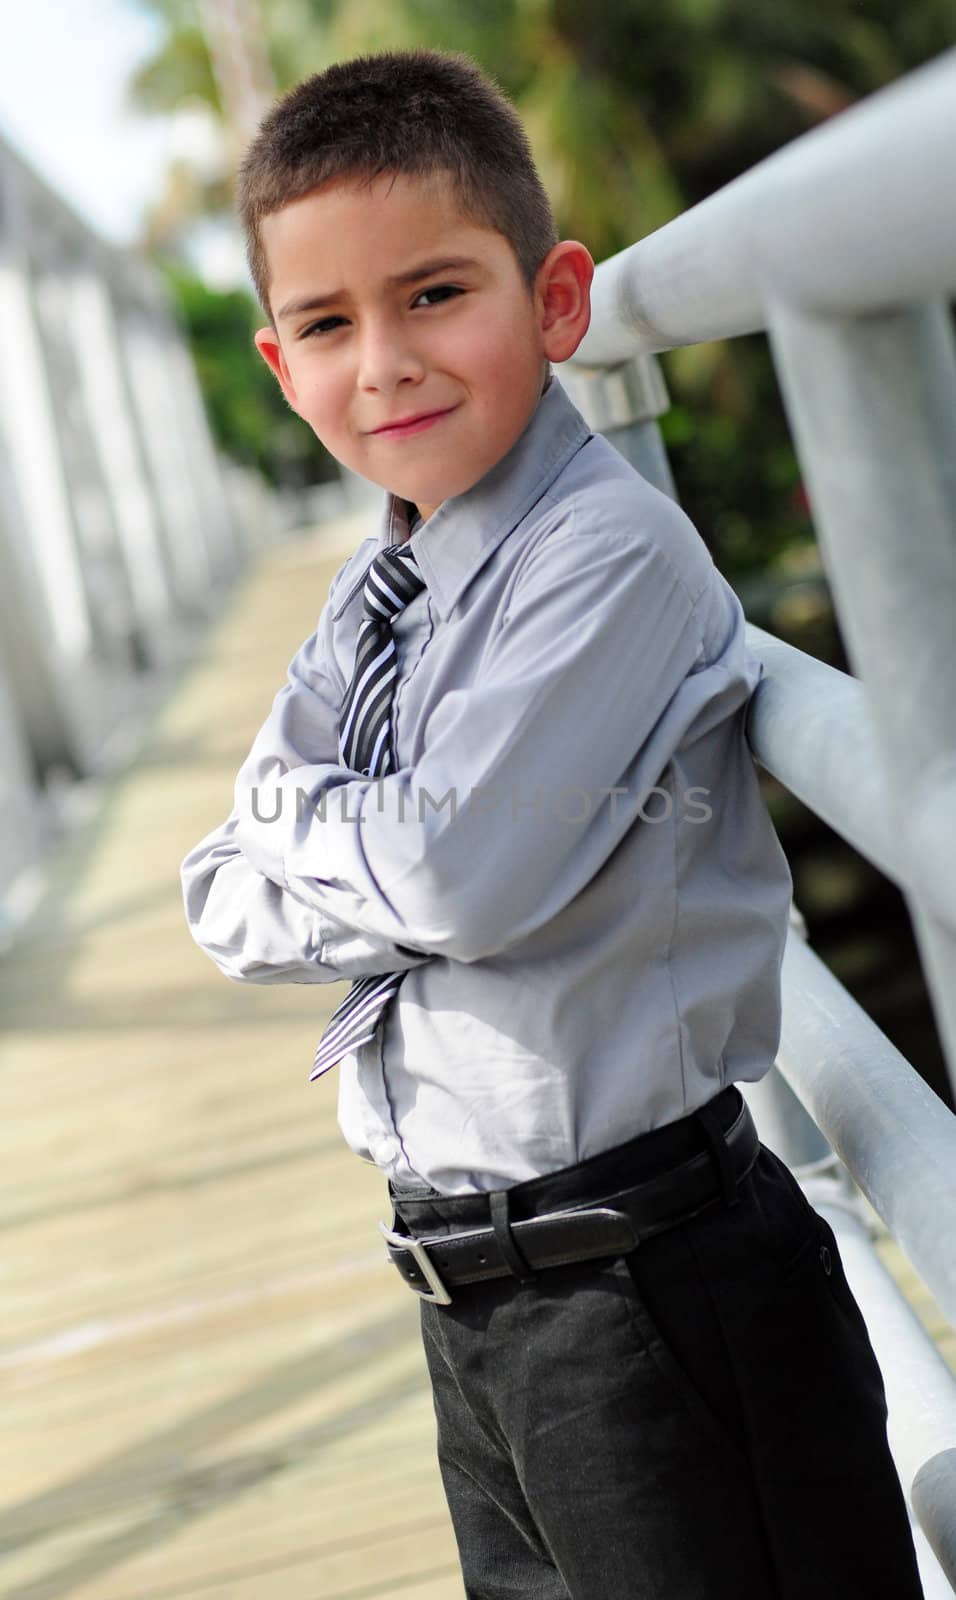 Serious young boy outdoors in suit with arms crossed